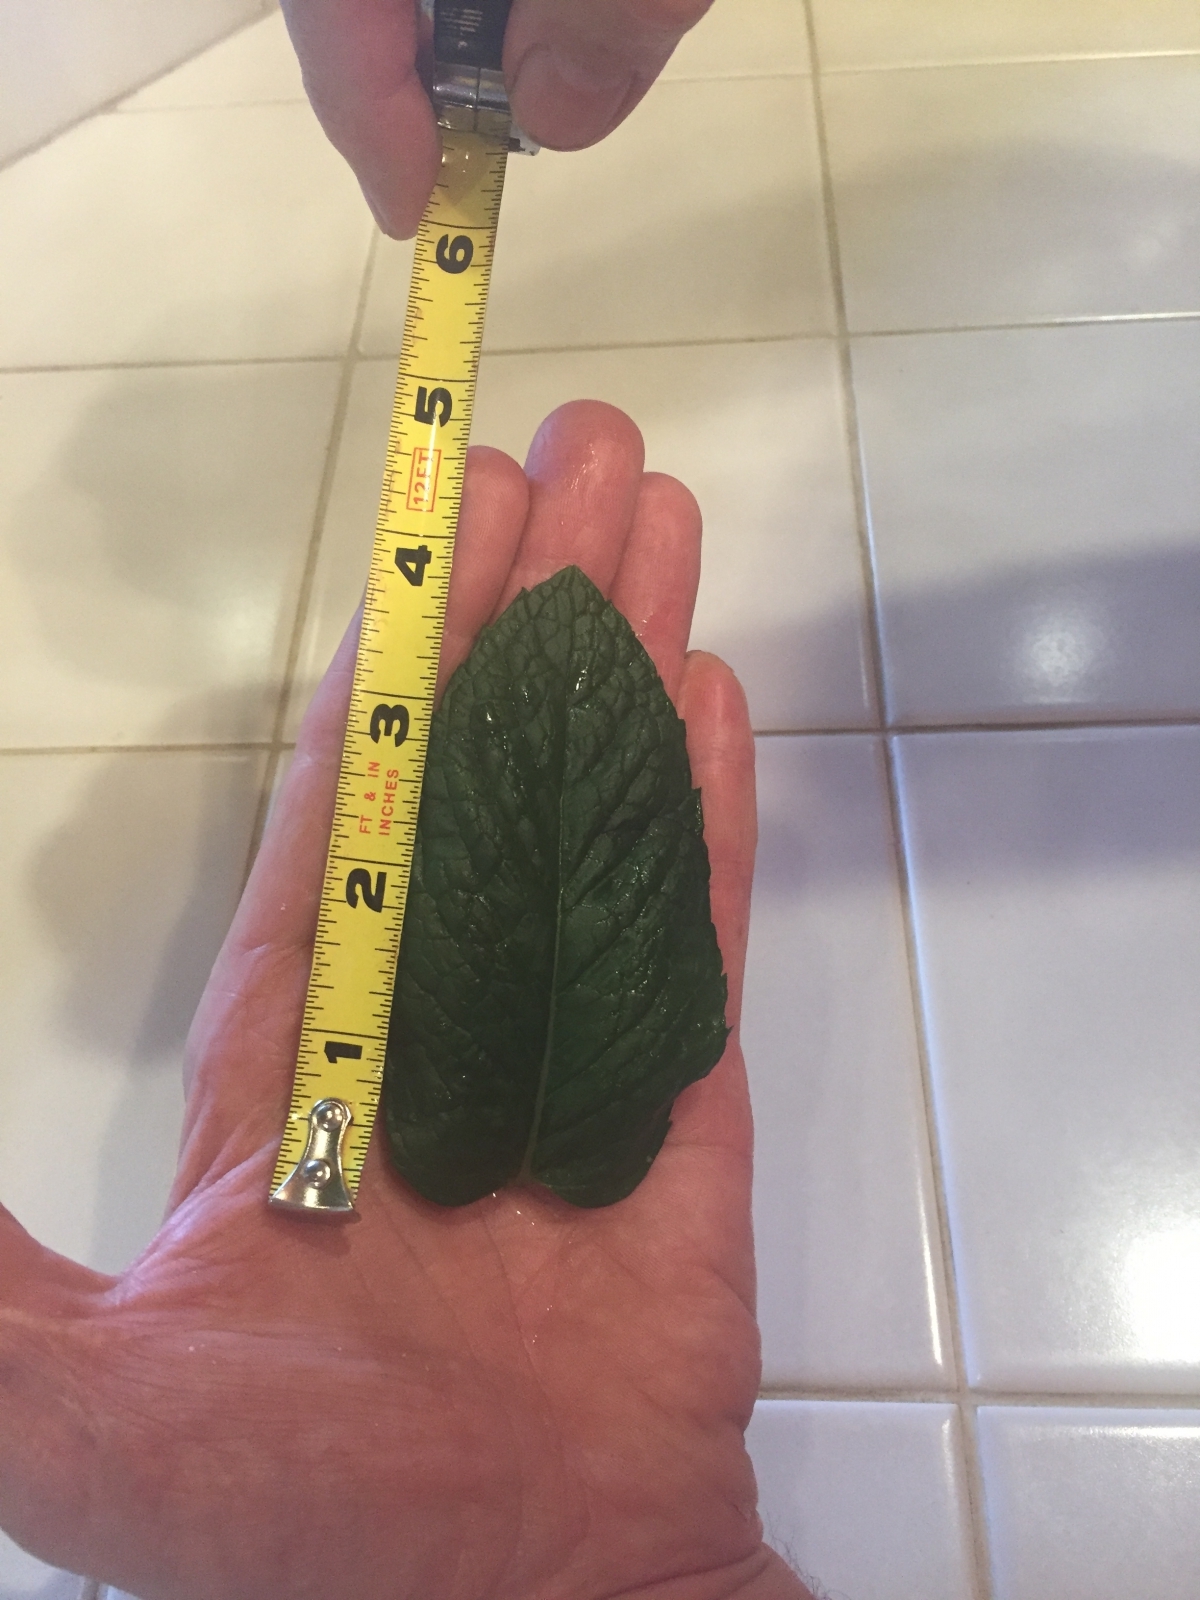 We were testing out a new Blue Gold™ Solution at the office and check out the growth on this mint herb leaves! It grew 4” long and 2.25” wide in just DAYS!